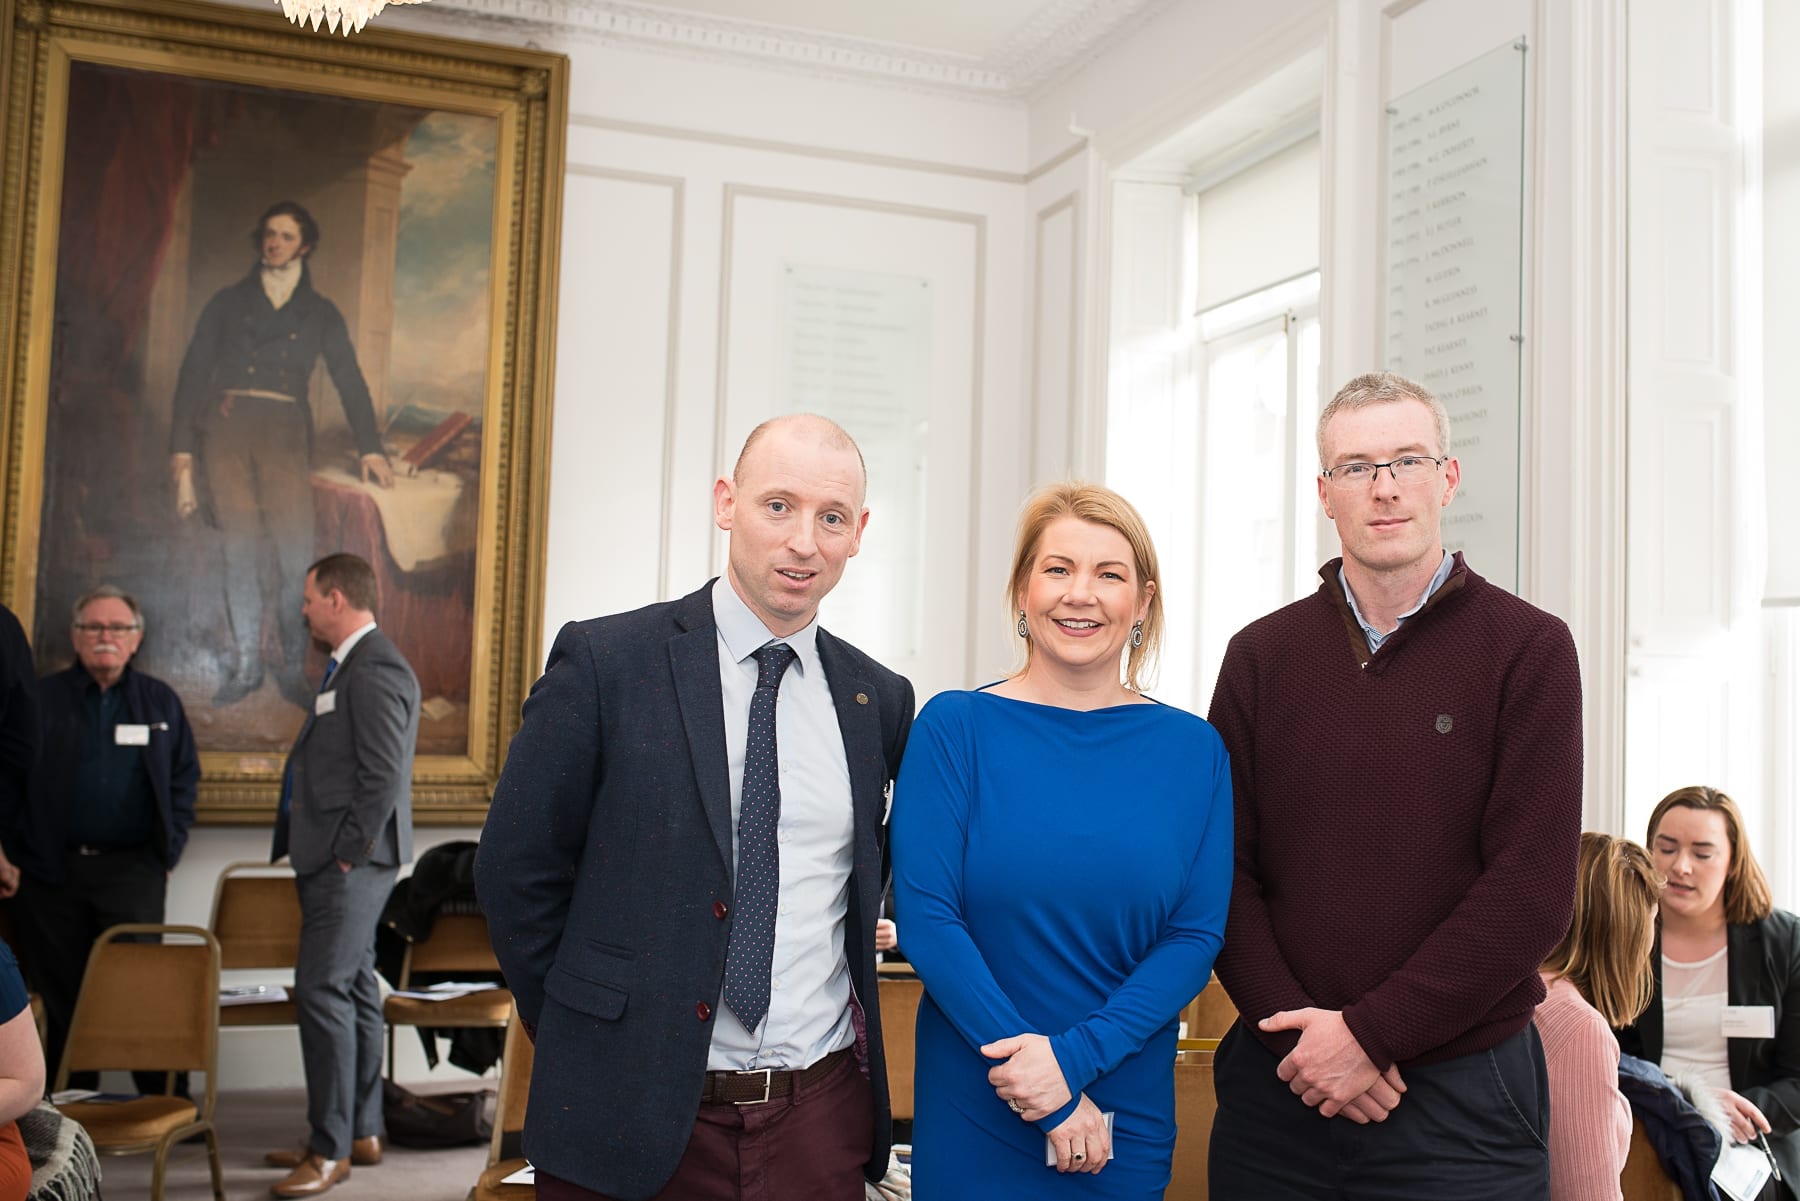 At the Limerick Chamber Skillnet Working Lunchtime Networking with Donal Fitzgibbon was From left to right: Donie McGrath - Limerick Local Employment Services, Joanne McEnteggart - First Names, Eamonn Gardiner - Limerick Chamber Skillnet
Image by Morning Star Photography